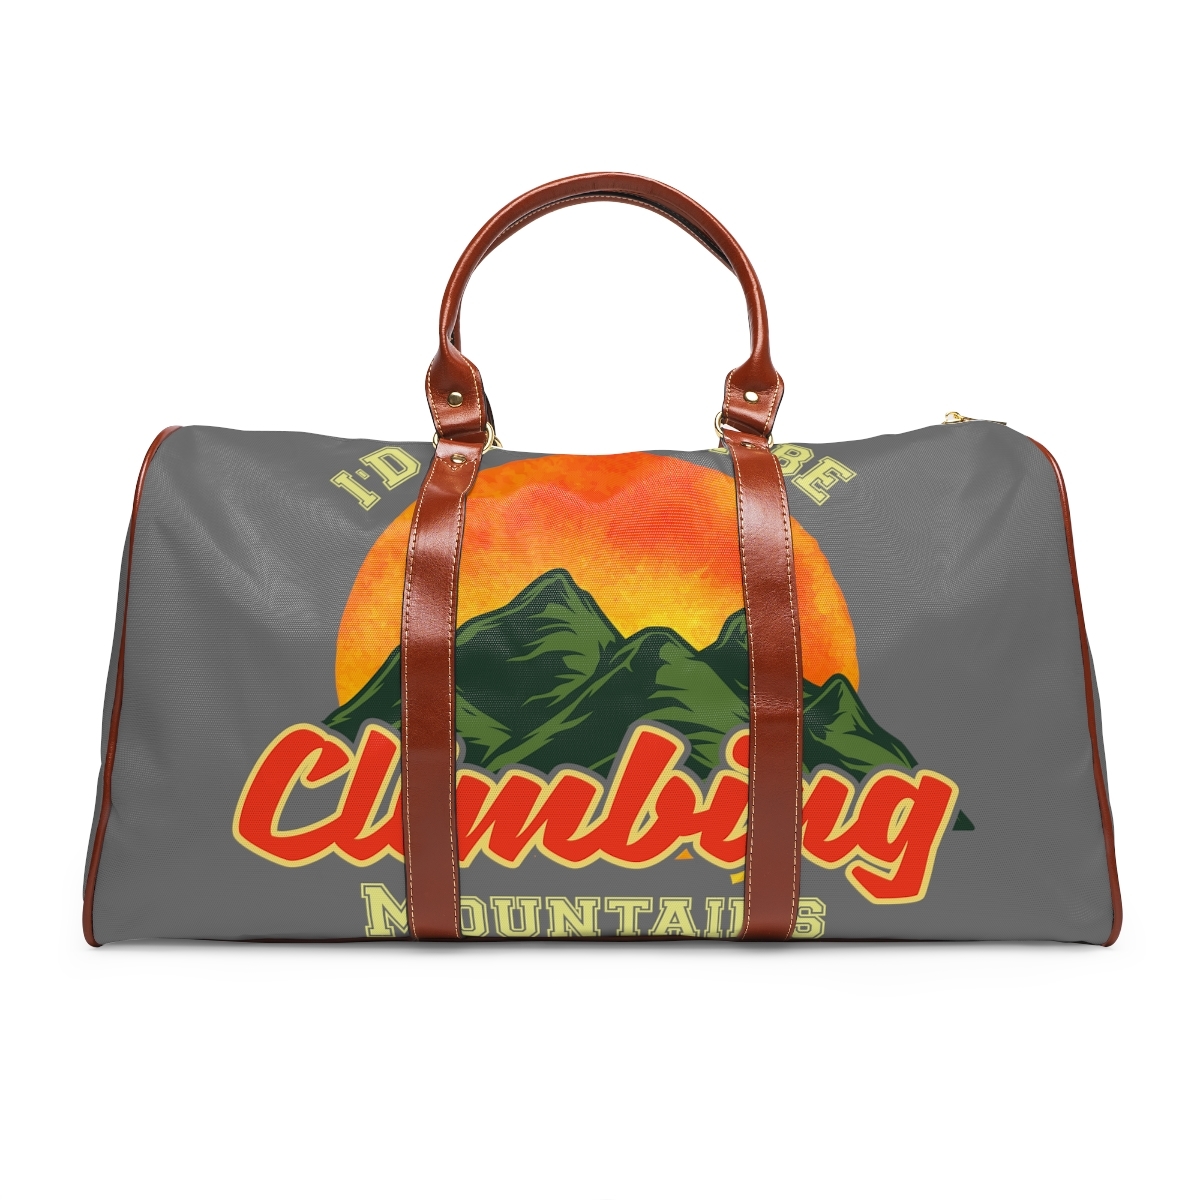 Personalized Travel Gear: Waterproof Travel Bag with Mountain Print - $93.73